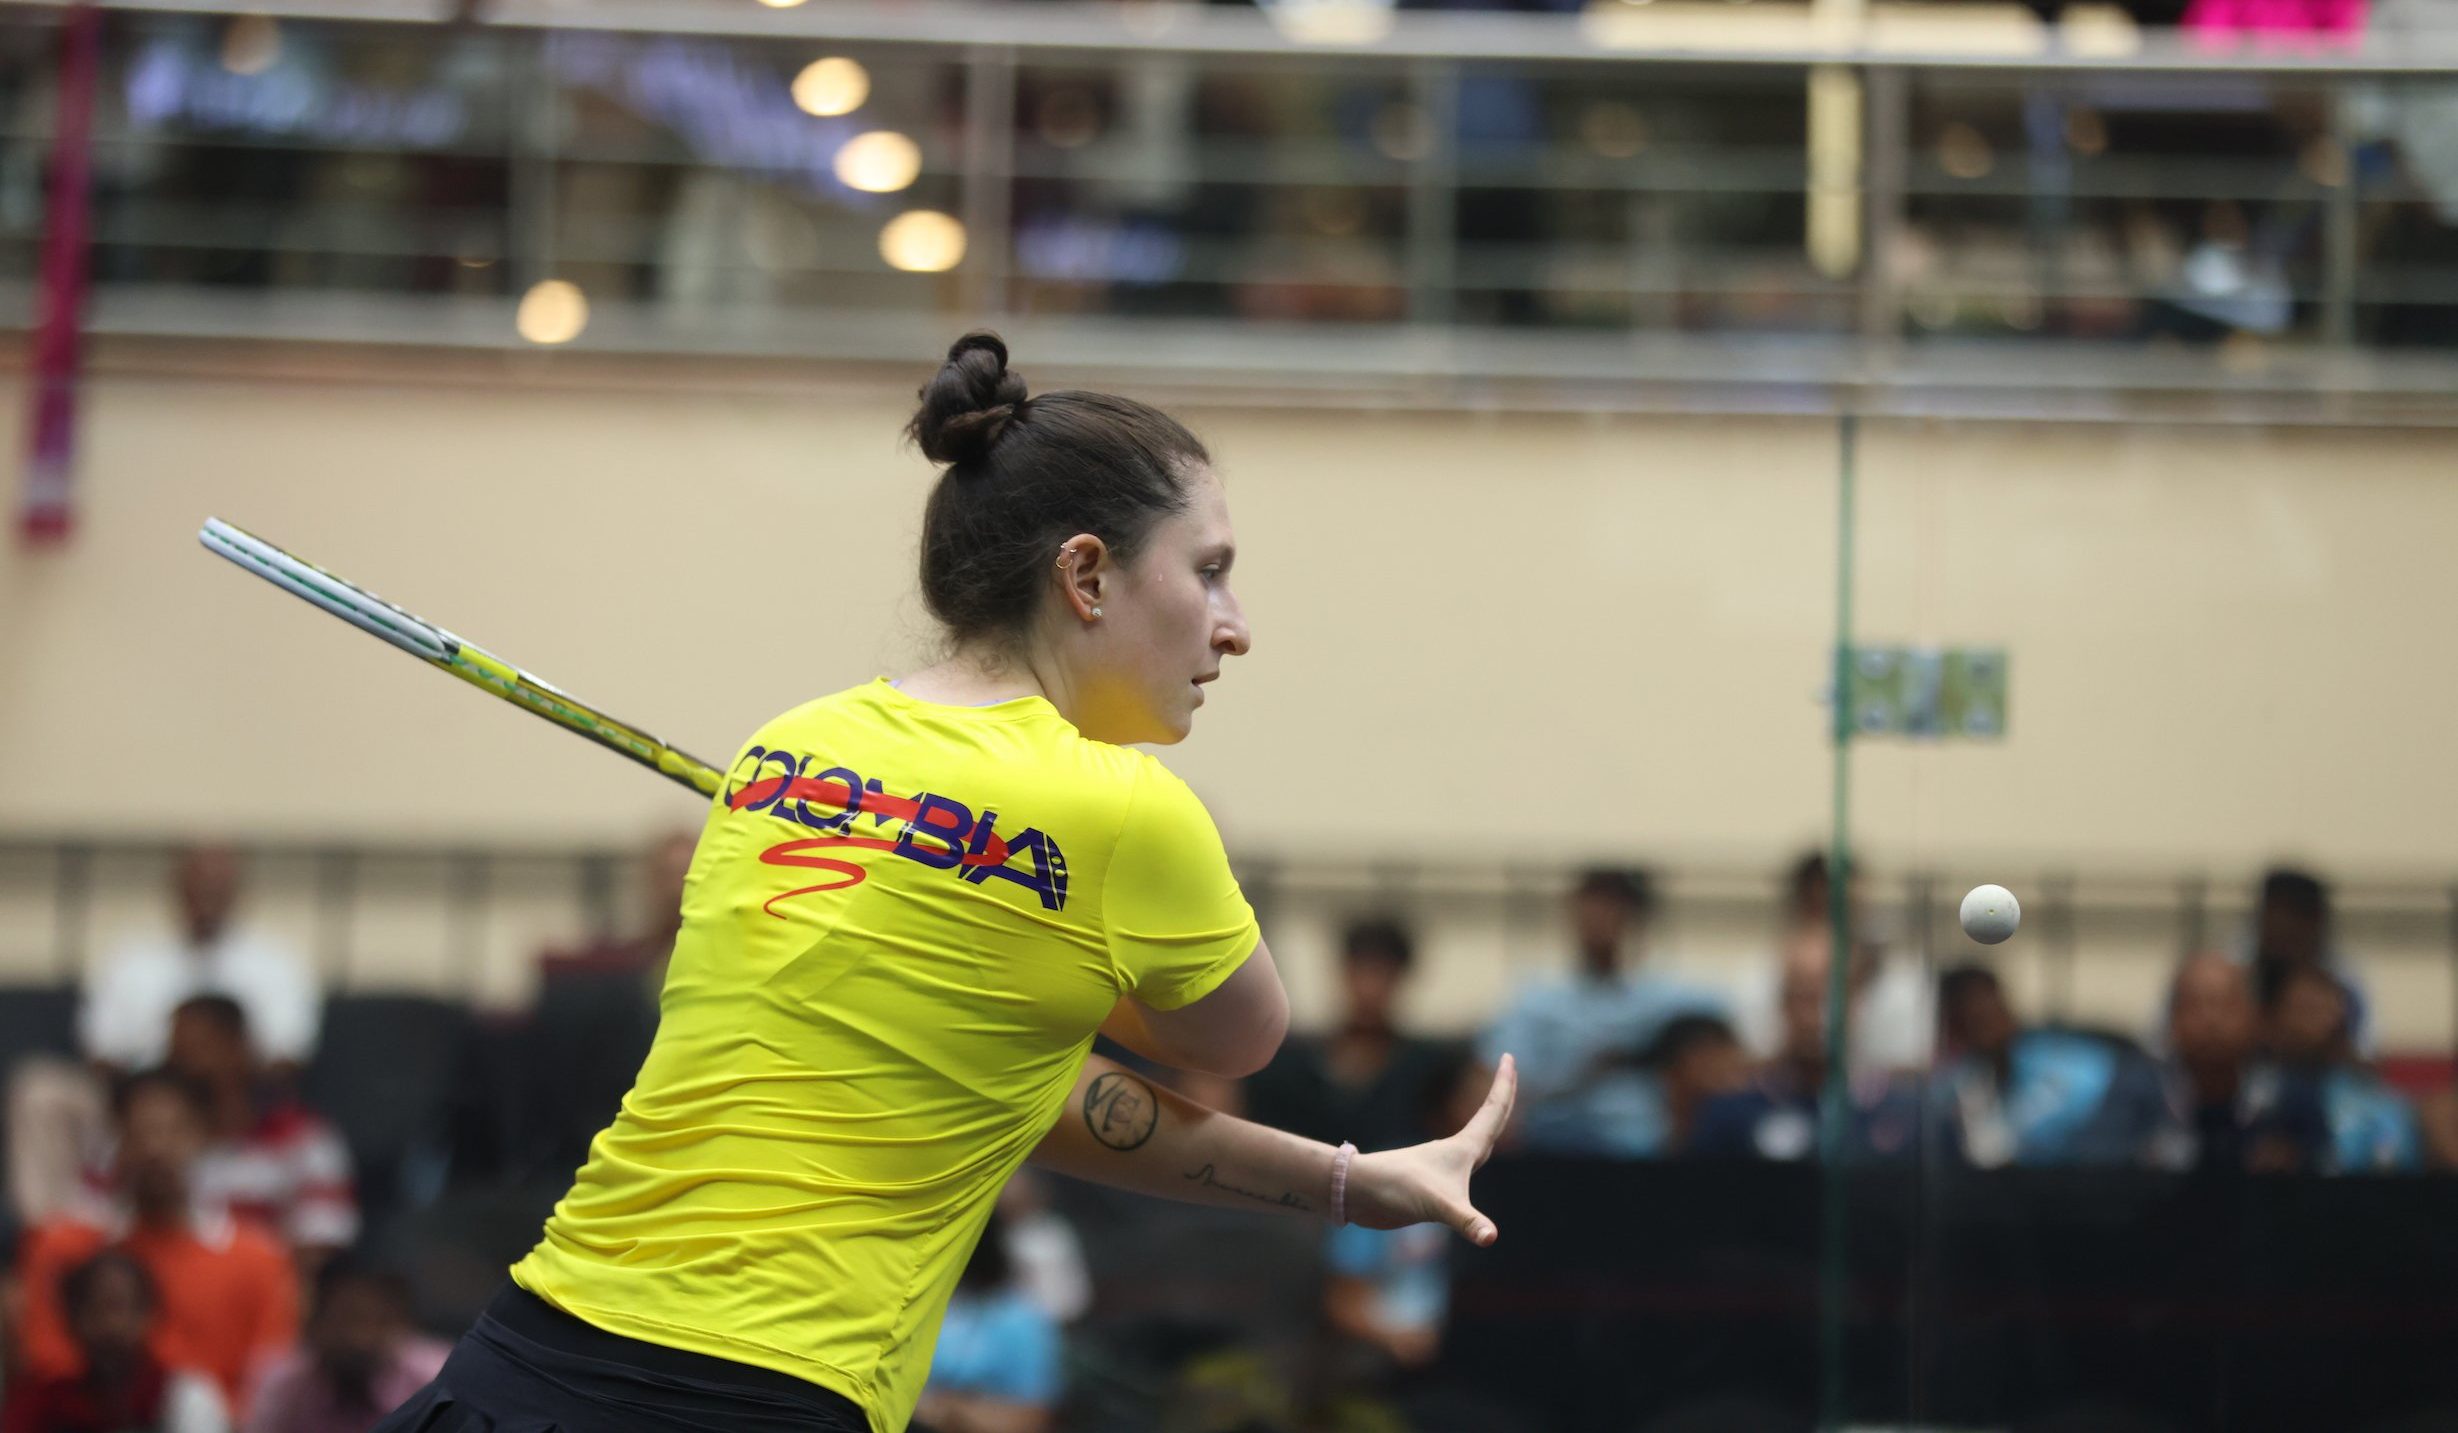 squash-competitions-at-santiago-2023-pan-american-games-begin-today